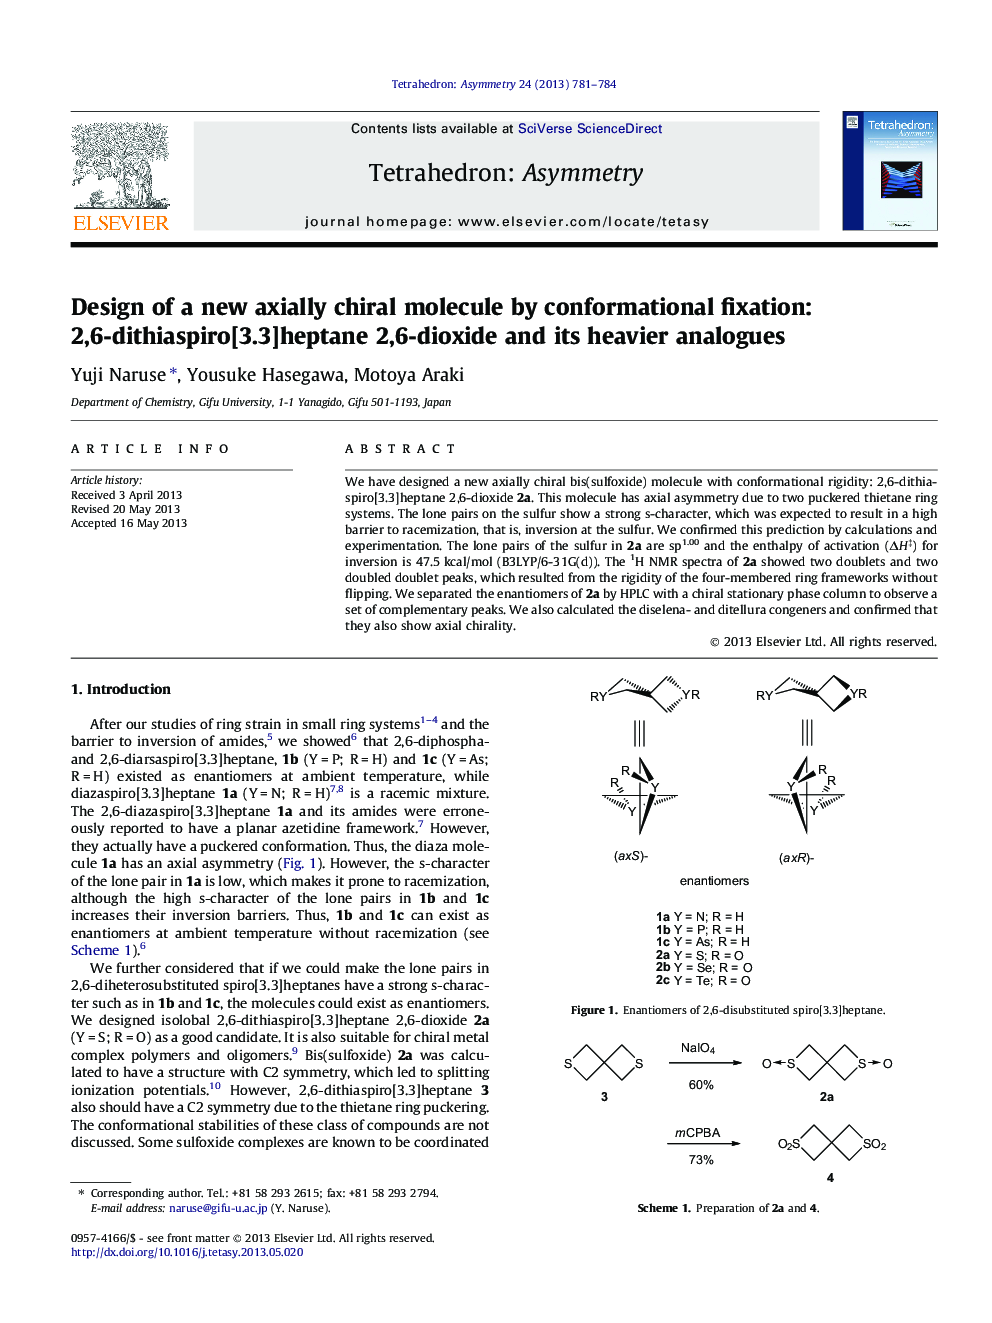 Design of a new axially chiral molecule by conformational fixation: 2,6-dithiaspiro[3.3]heptane 2,6-dioxide and its heavier analogues